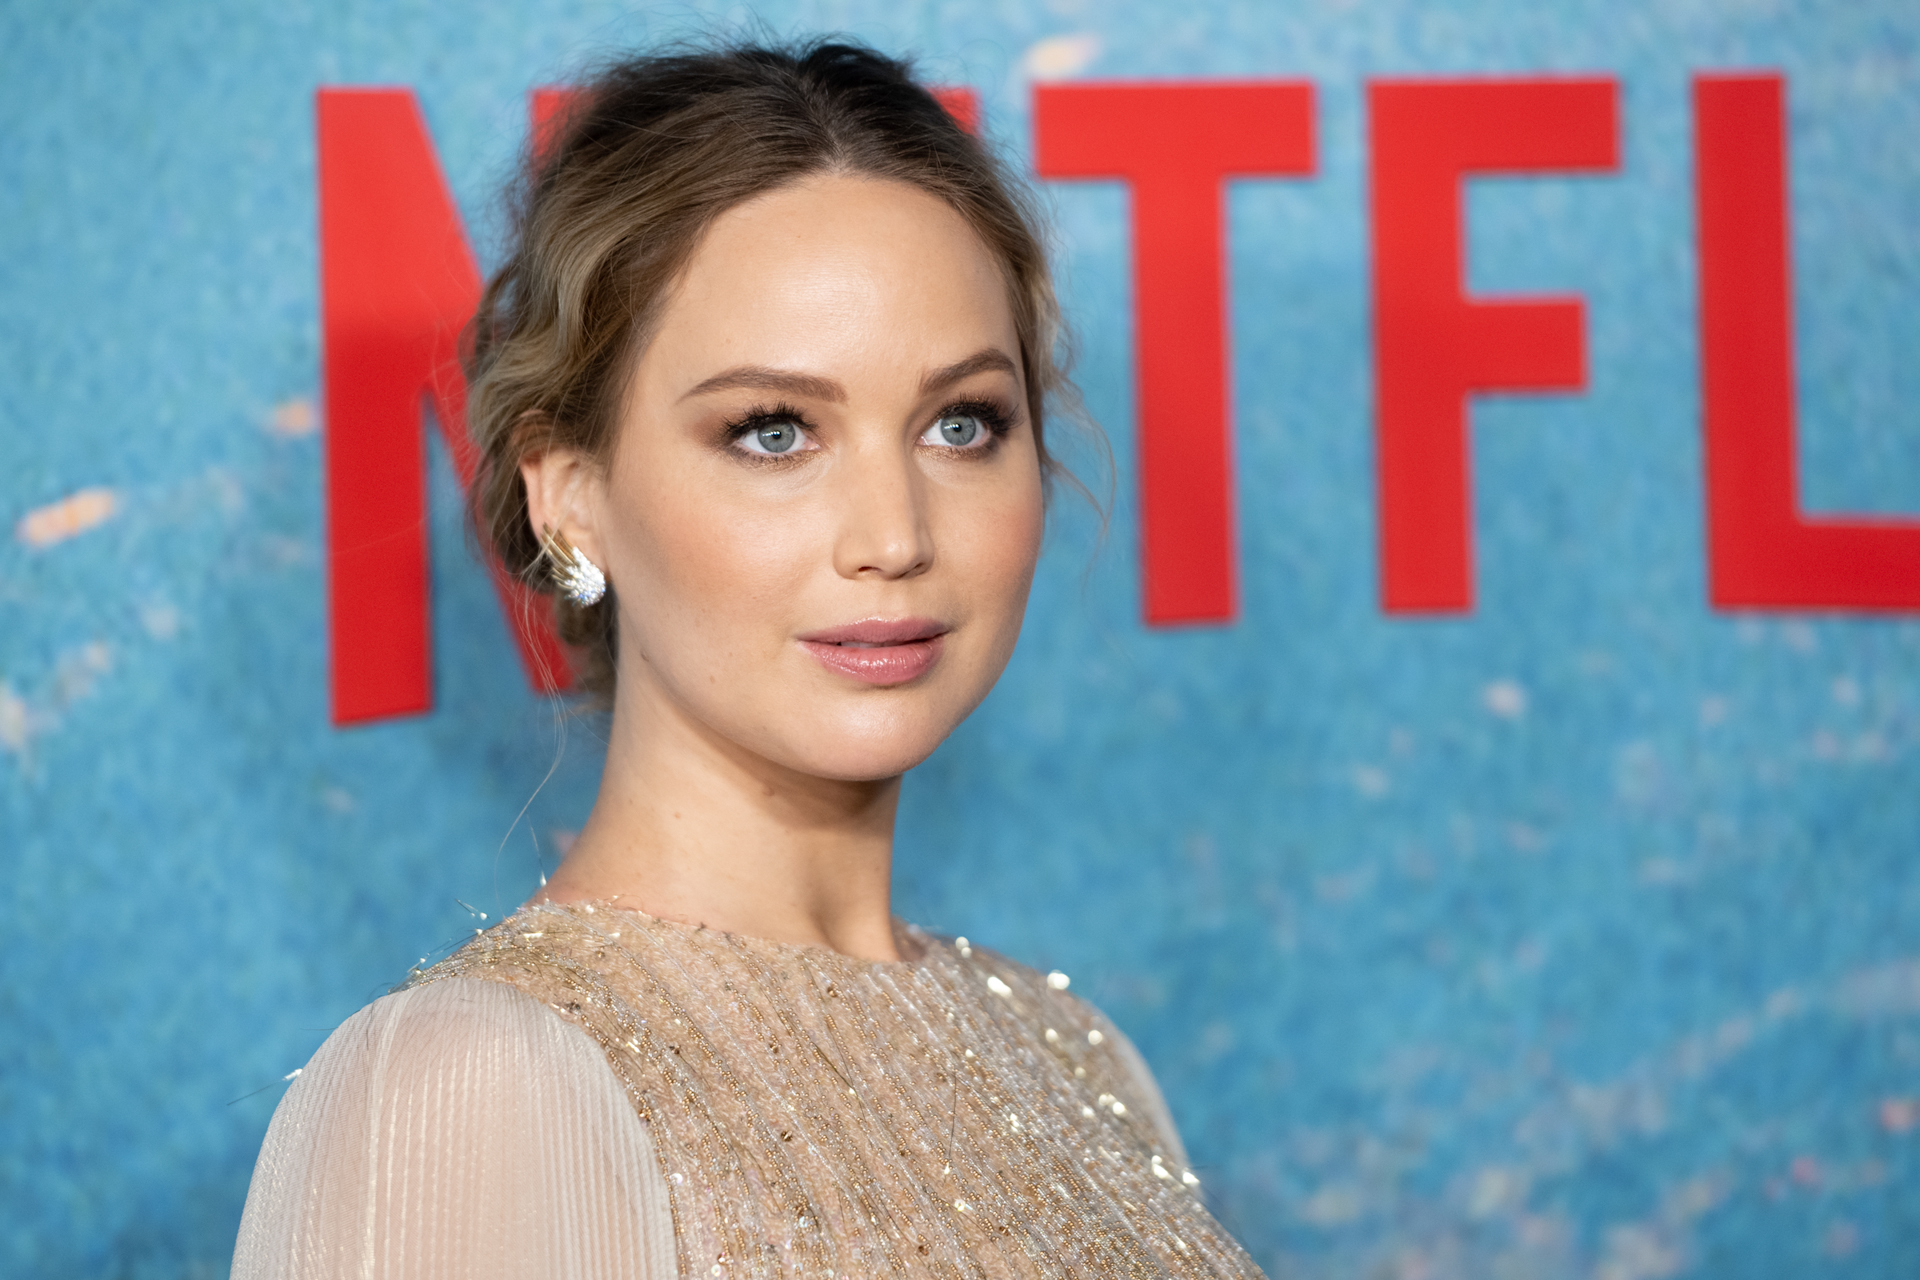 <p>Who are the popular actresses? We asked that question to our visitors and this is, in no particular order, the list of most loved actresses. Enjoy this photo series.</p>